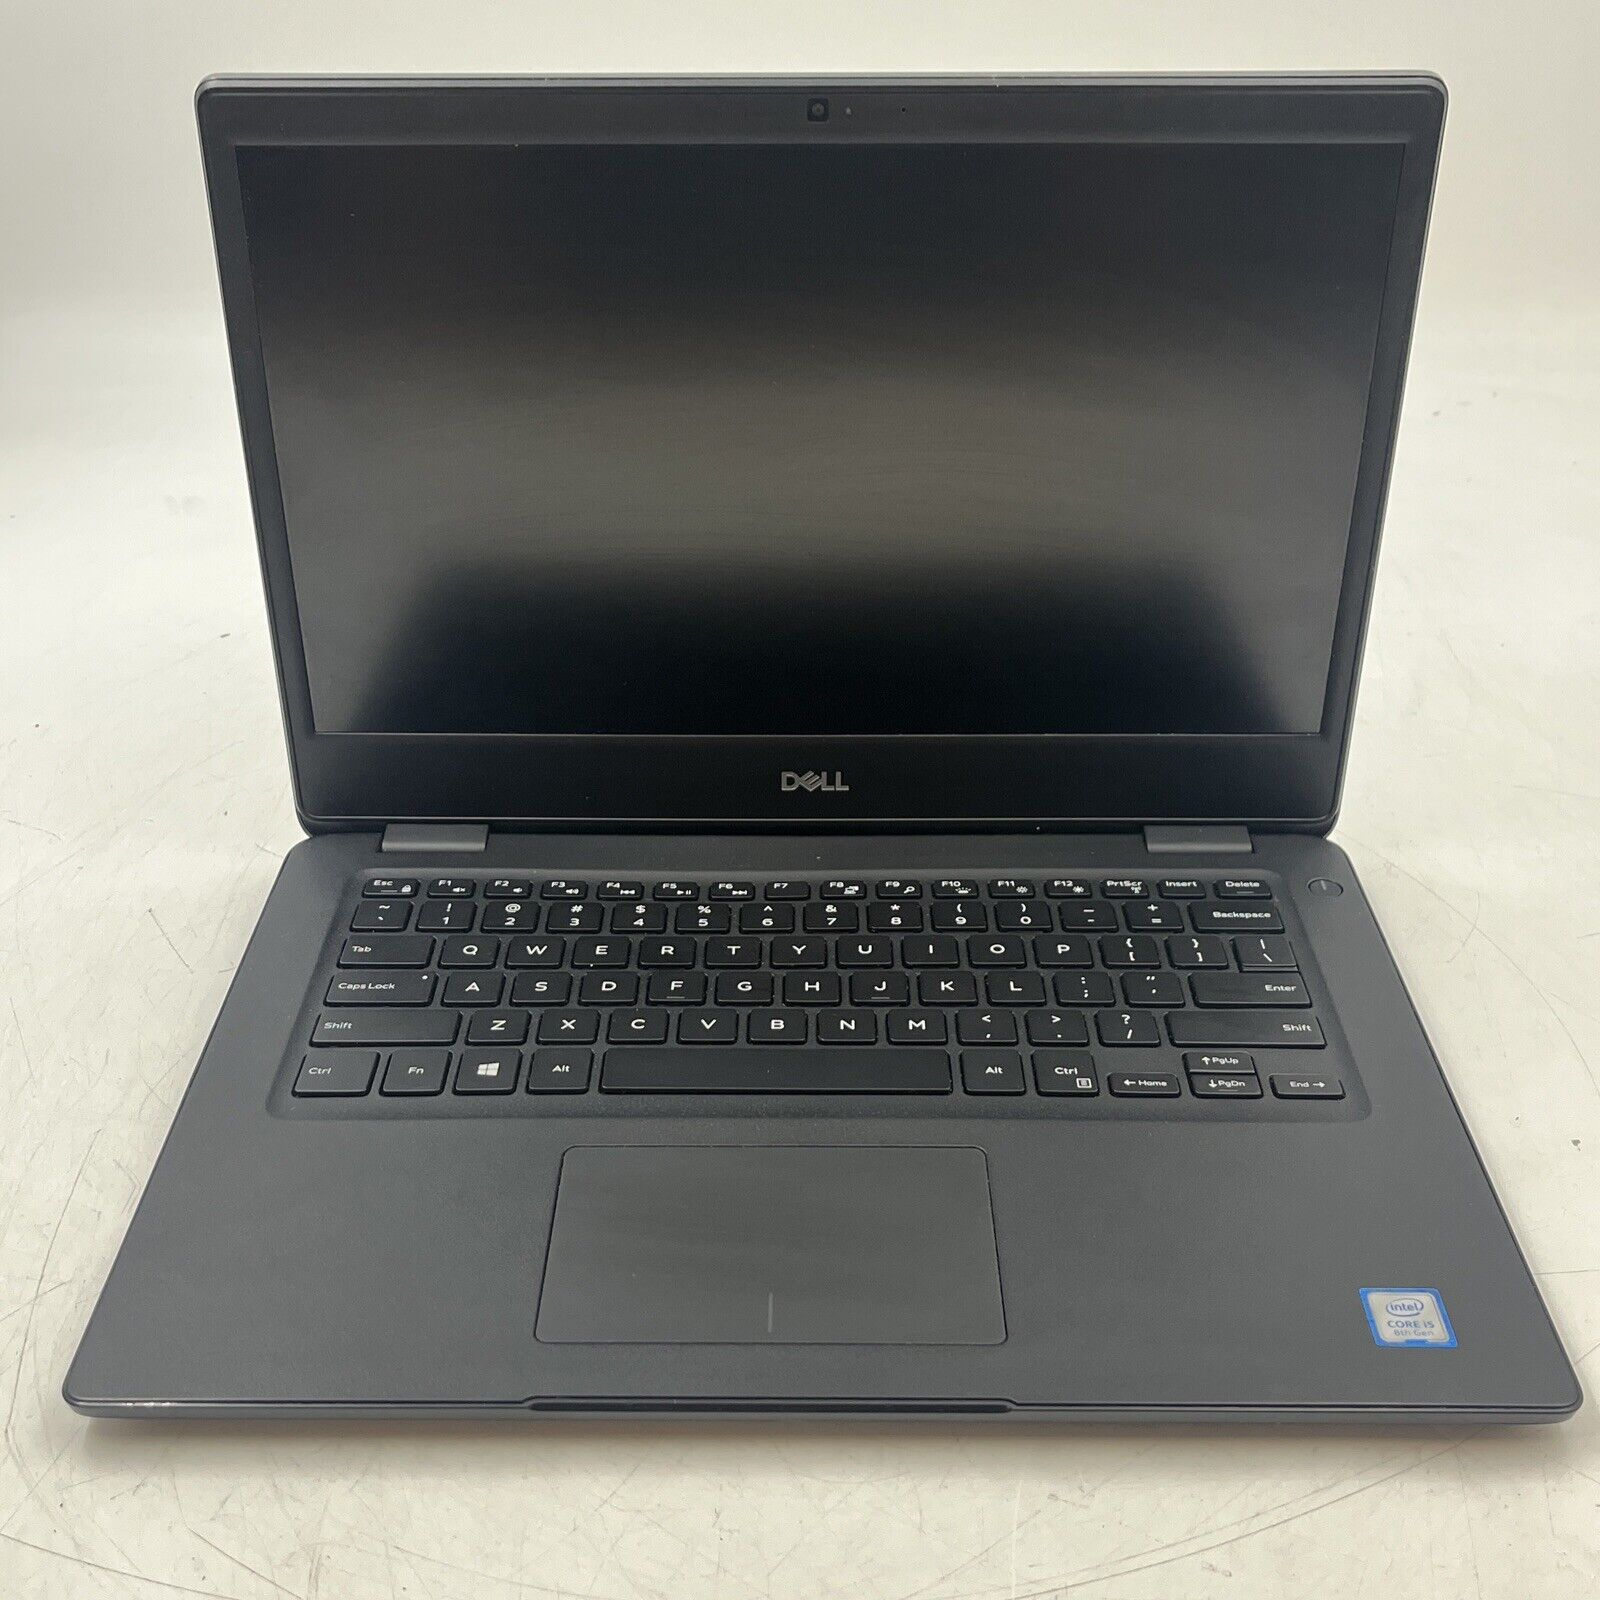 Dell 3400 For Parts-No Power. i5 1.6GHz, No RAM/HD/OS. READ